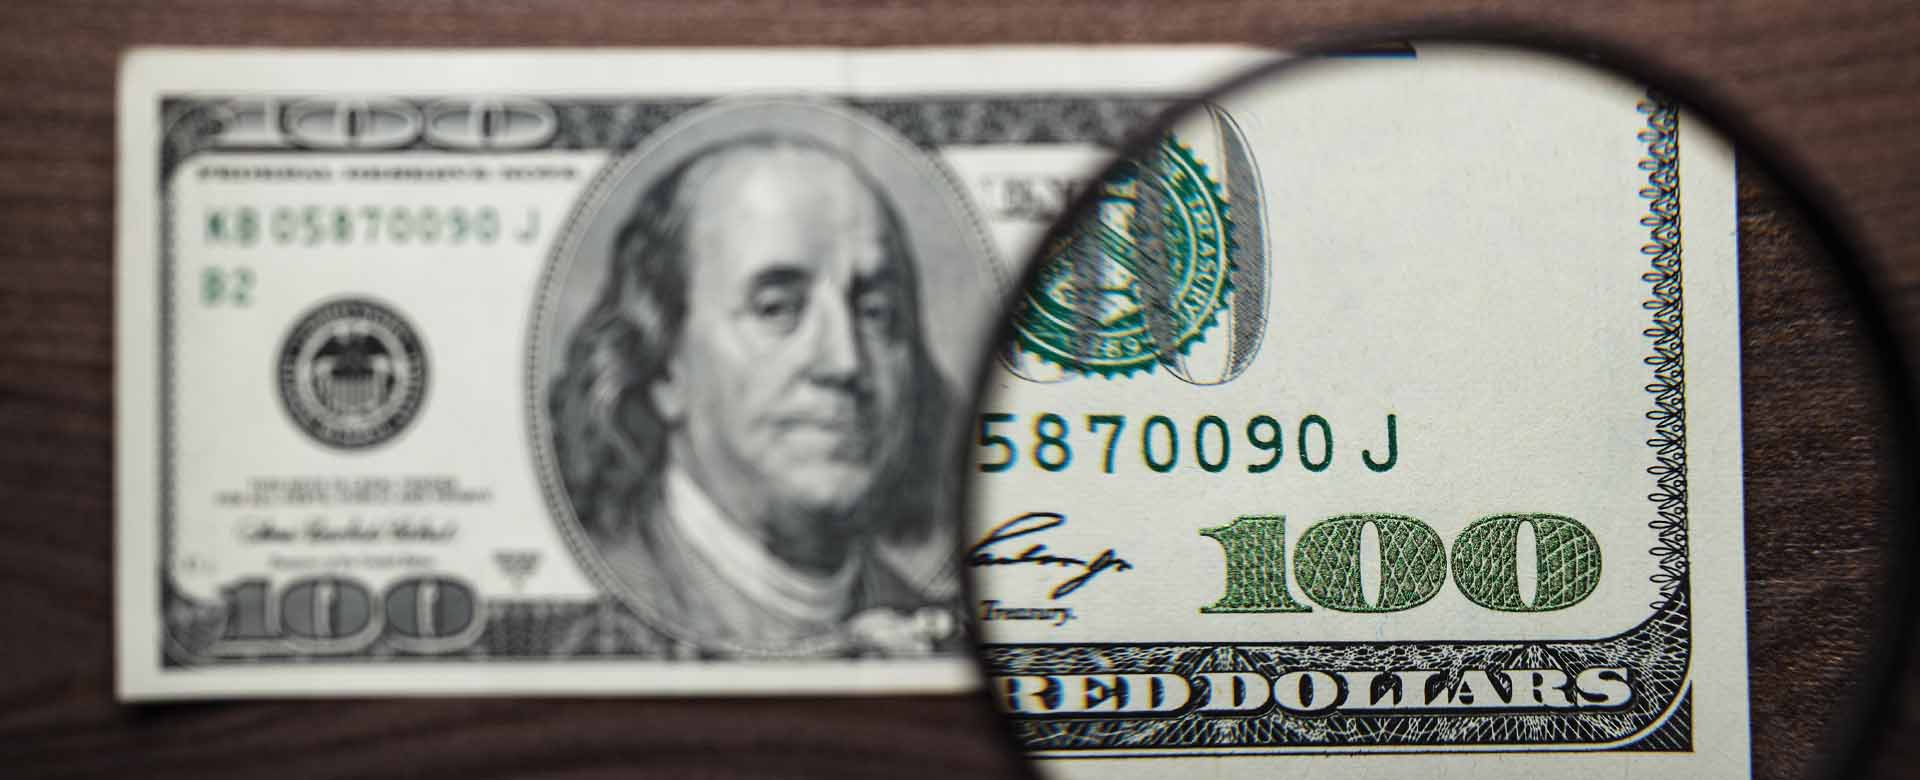 Tips for Spotting Counterfeit Money